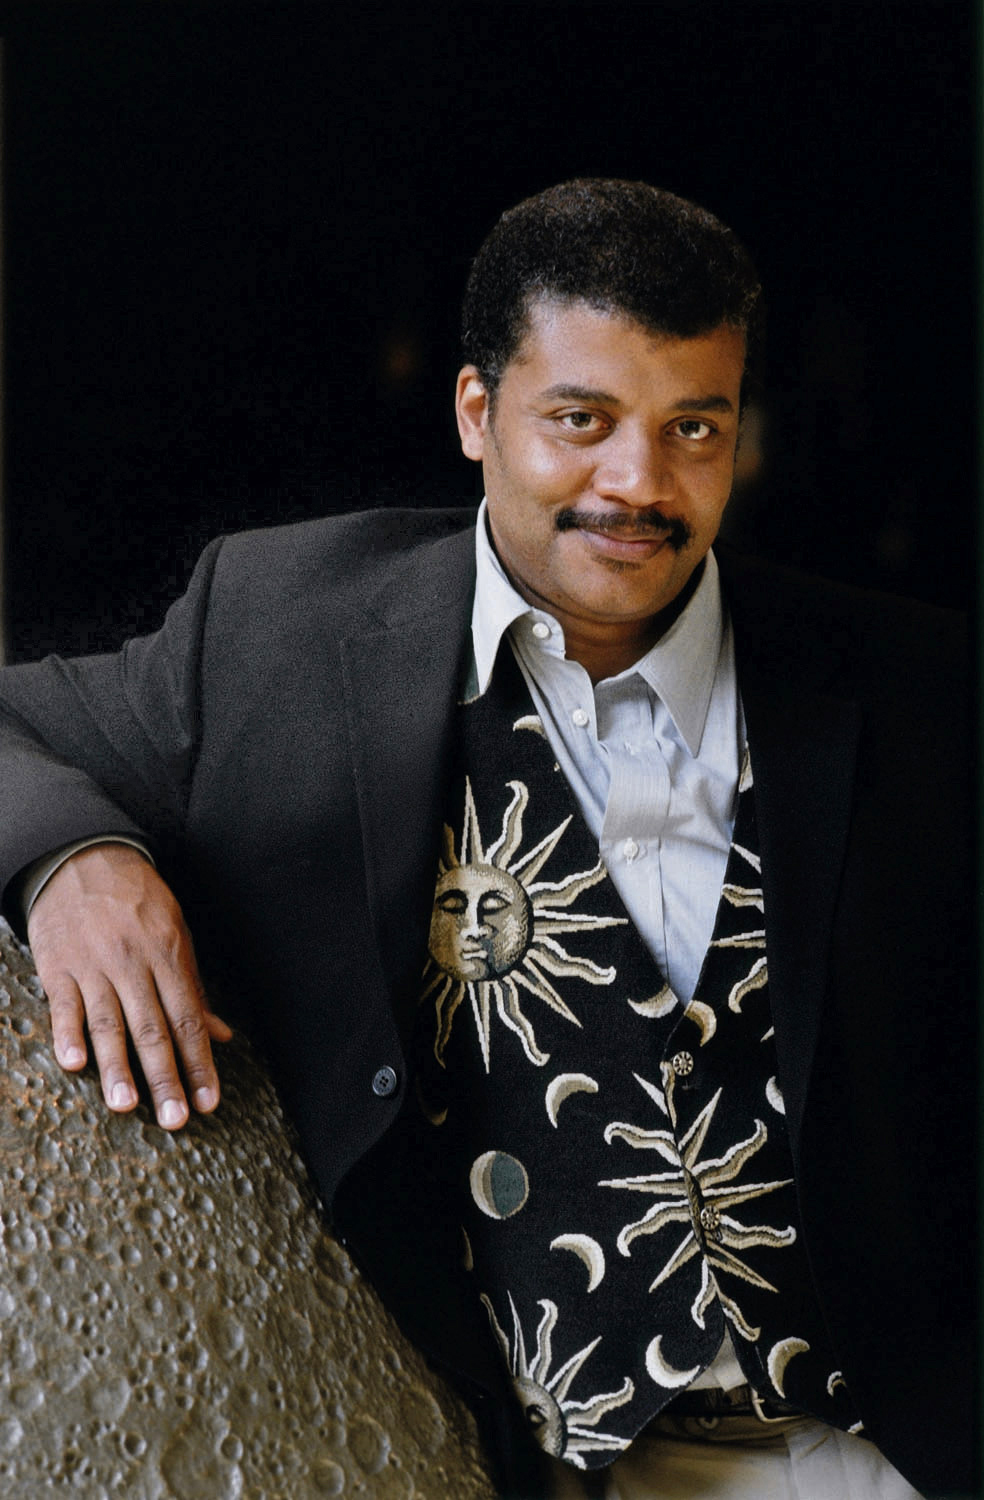 Photo of Neill deGrasse Tyson, the director of the Hayden Planetarium at the American Museum of Natural History.